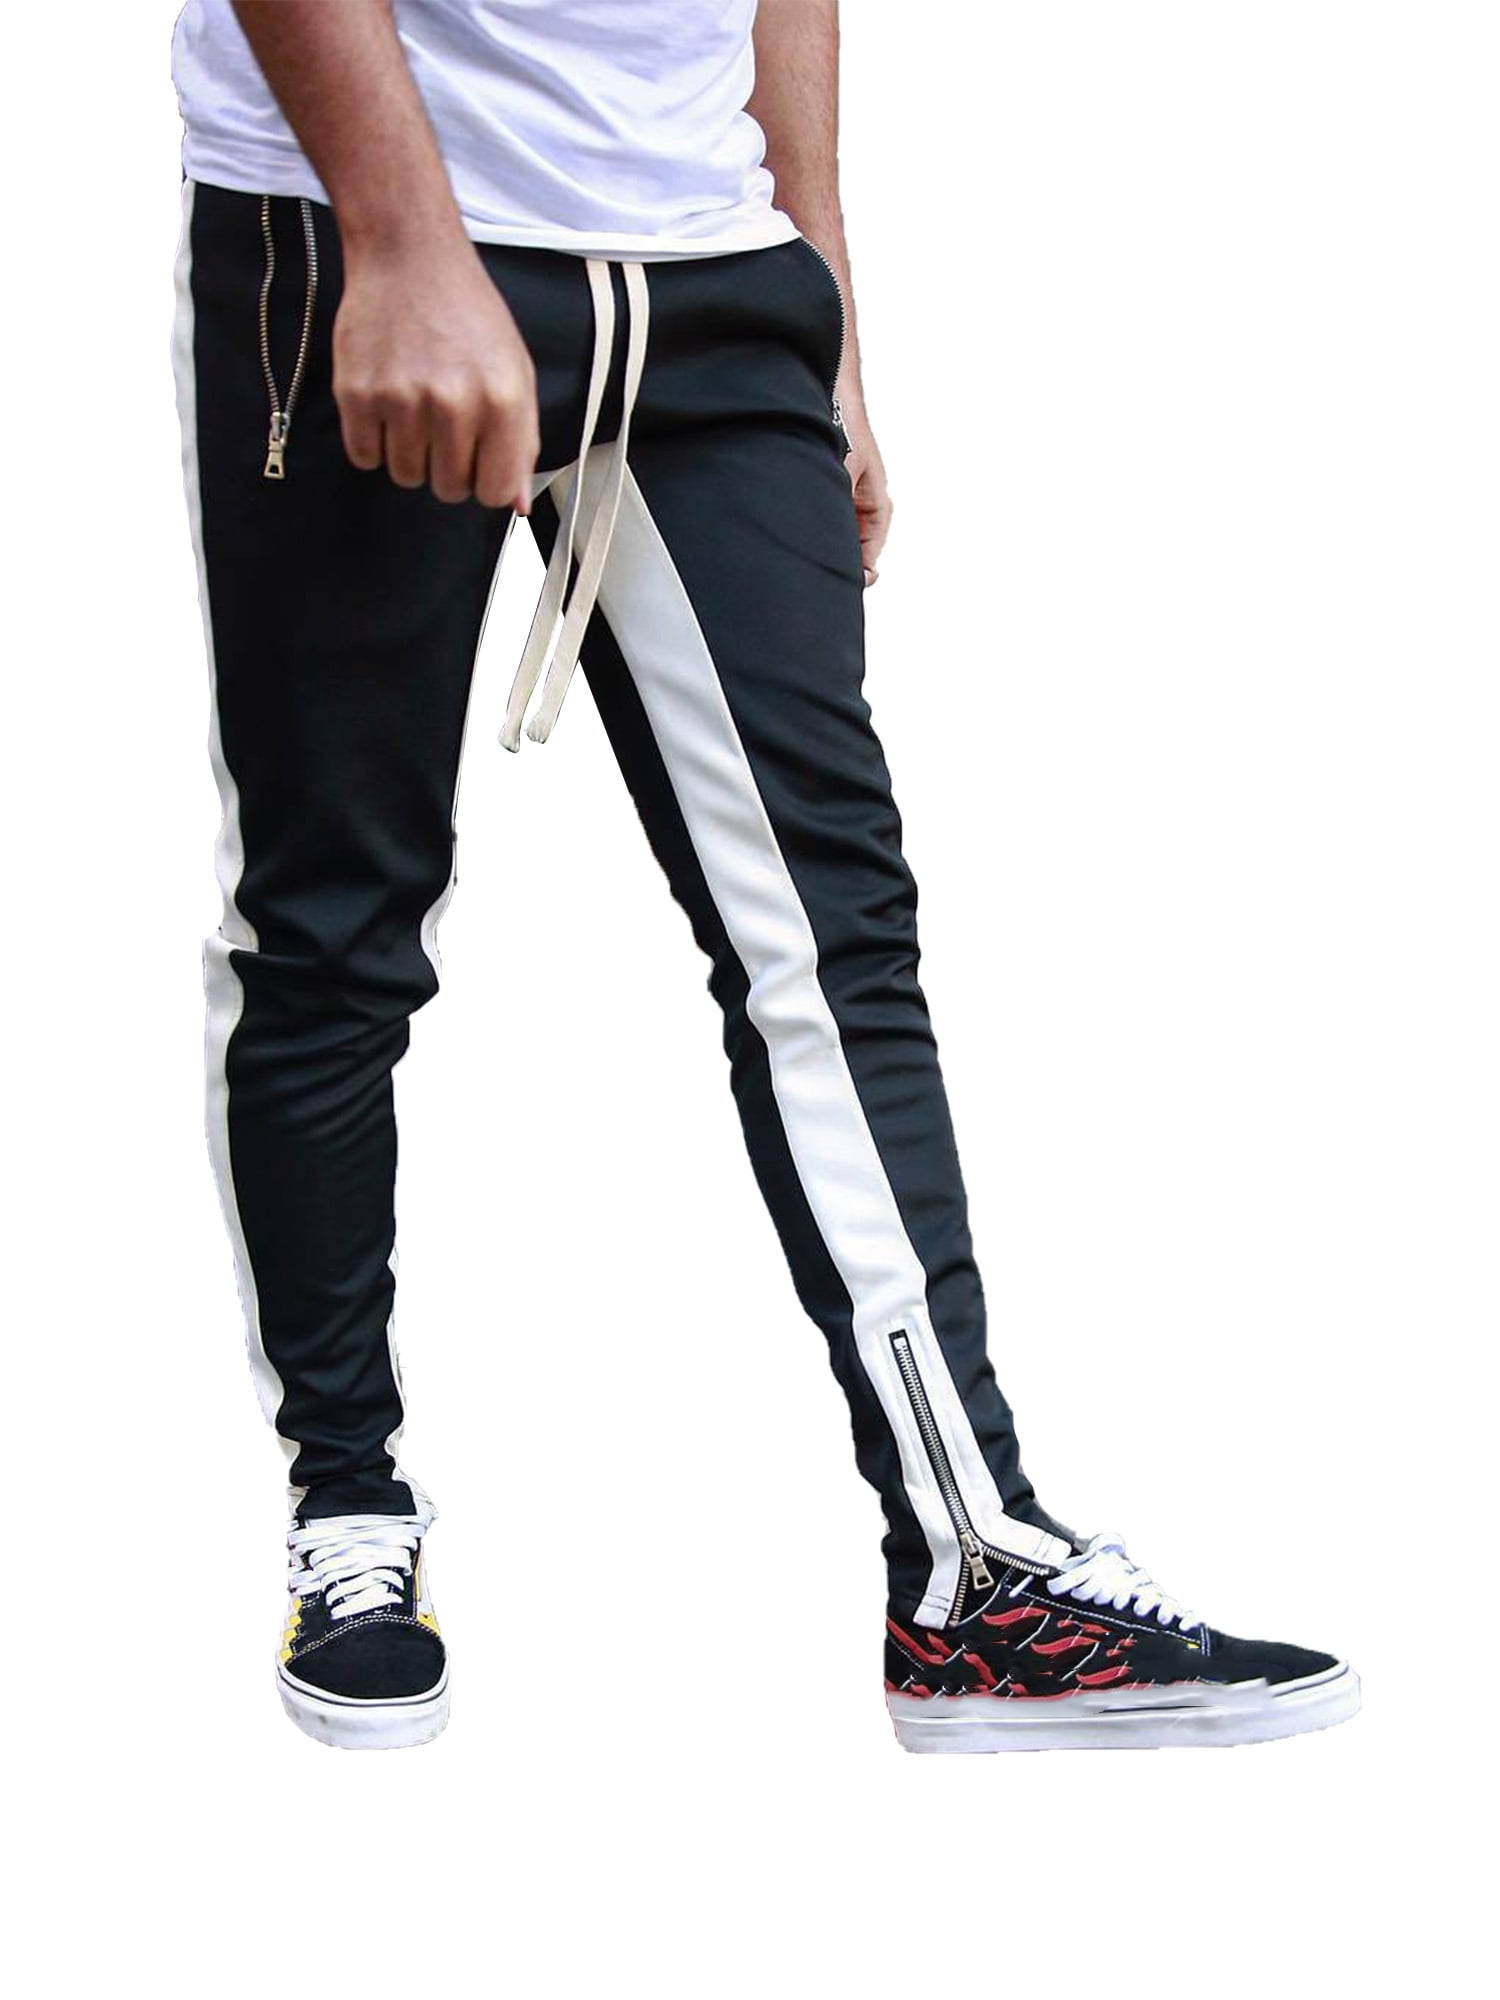 Men Casual with Side Taping Gym Sport Fitness Workout Running Pants Slim Fit Zipper Active Sweatpants Trousers - Walmart.com